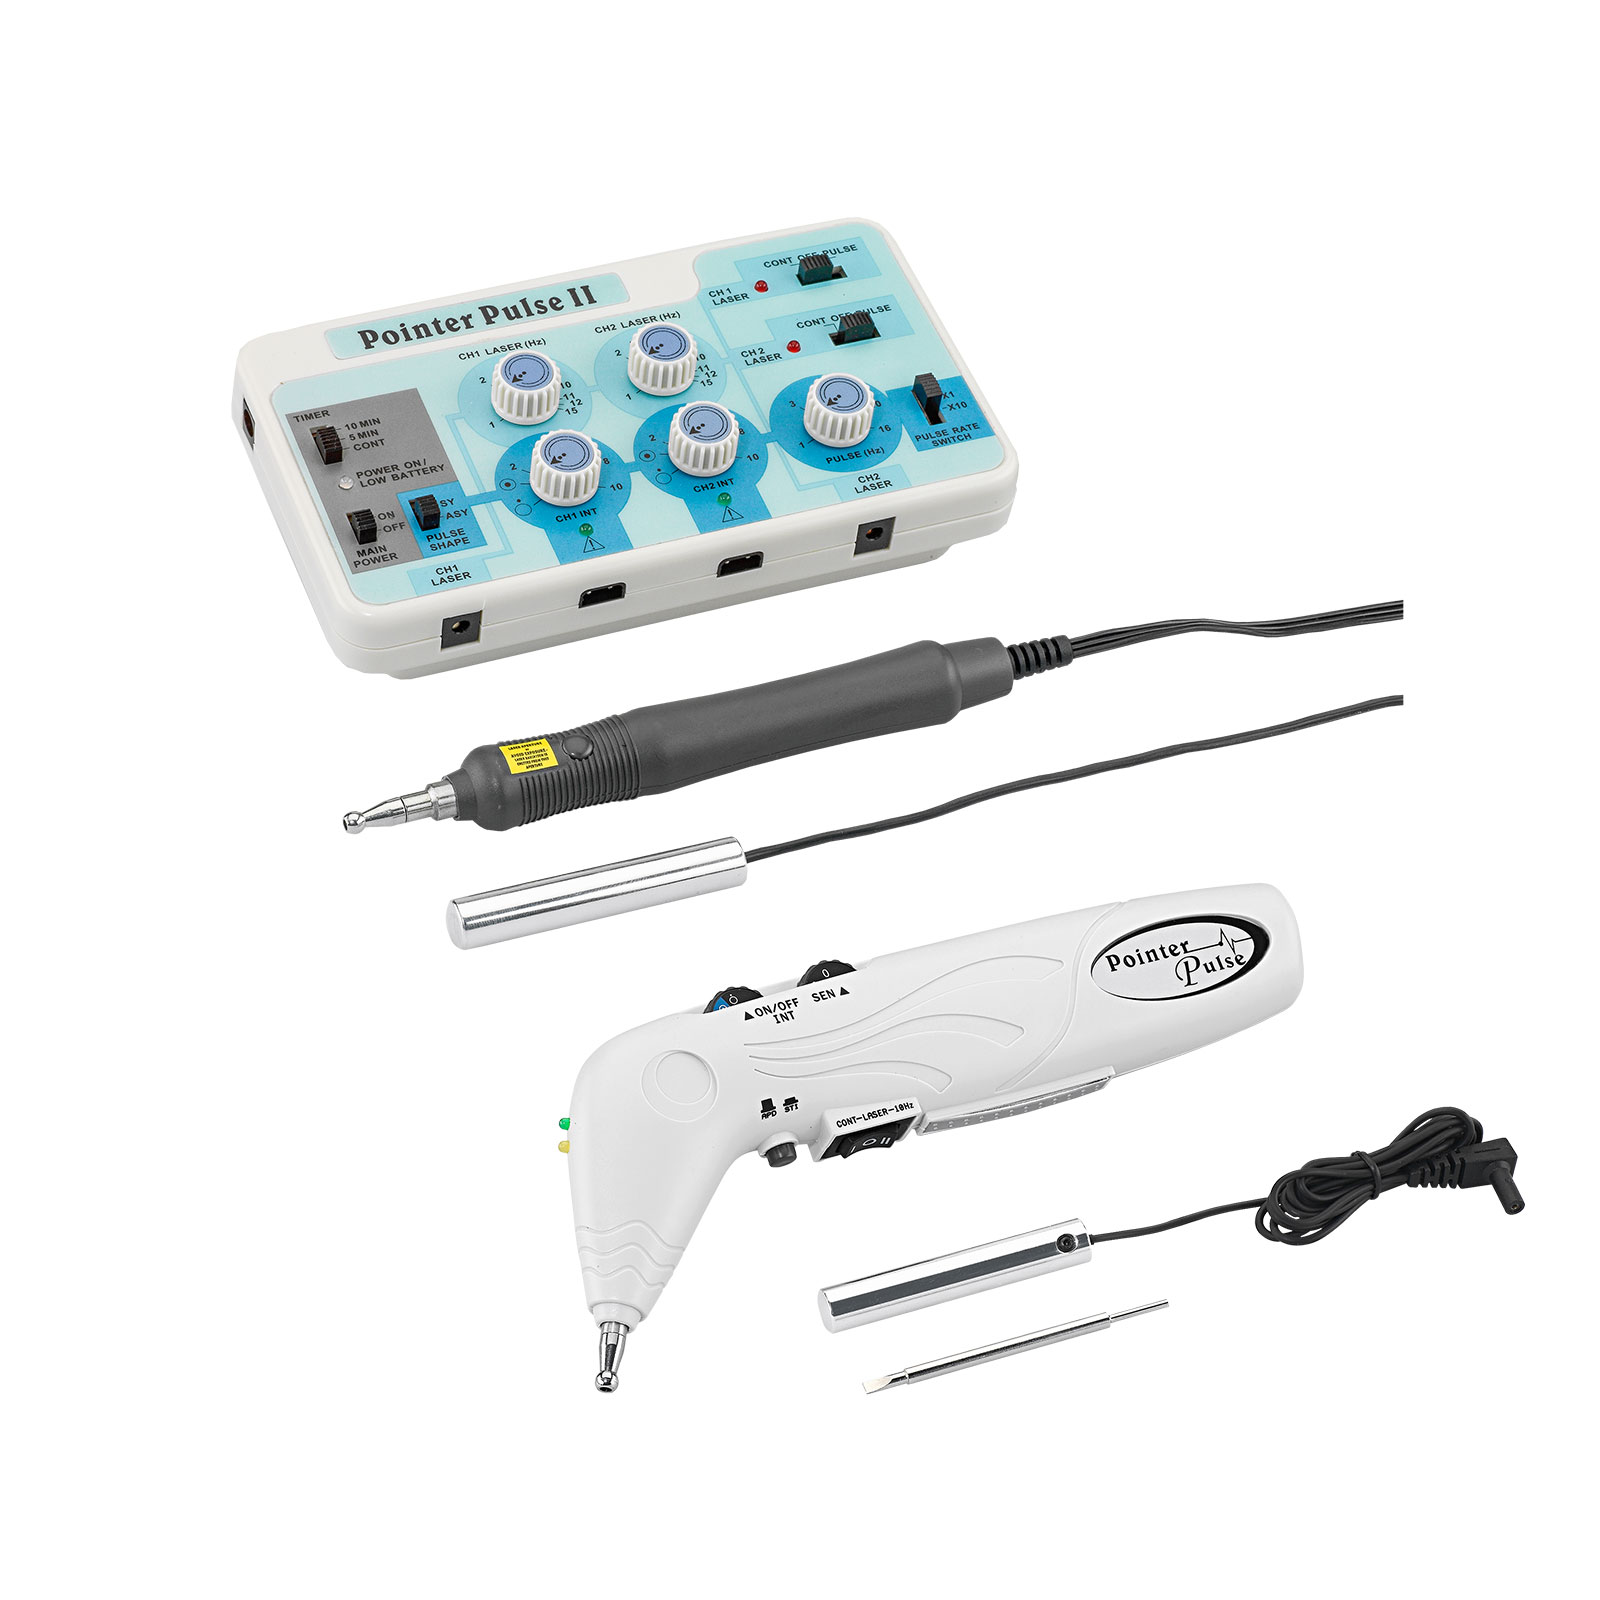 https://www.acupunctureworld.com/out/pictures/master/product/1/A011870-acupuncture-tens-laser-pointer-pulse-stimulation.jpg